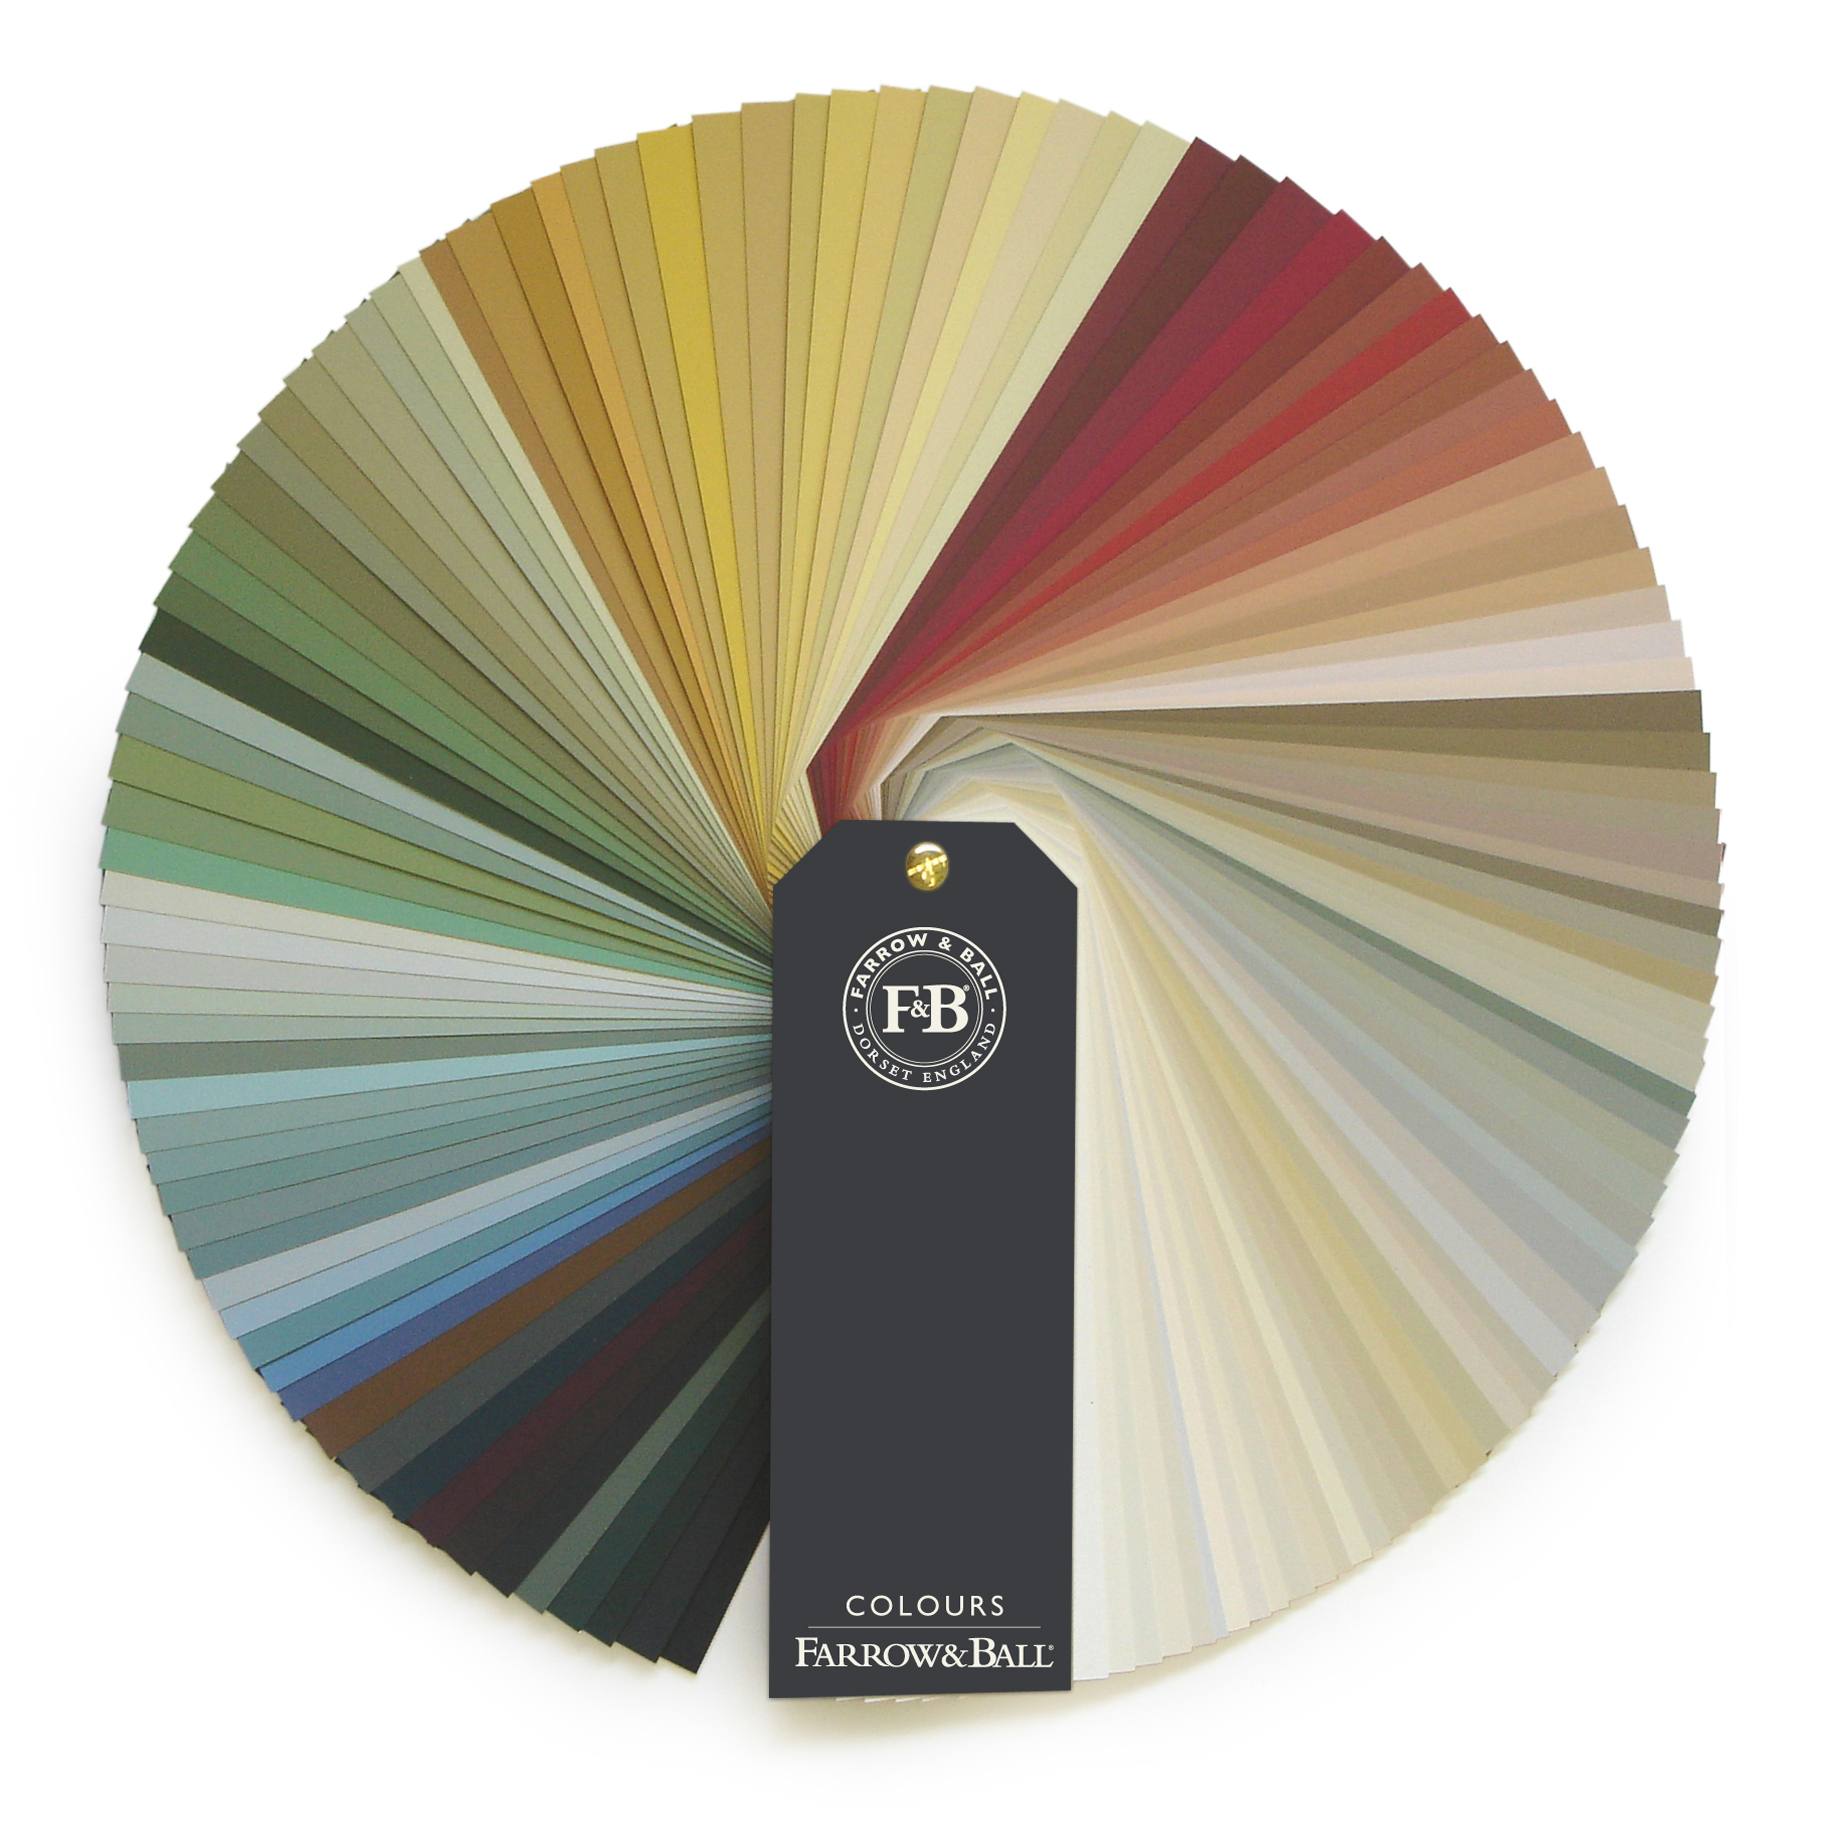 Exclusive Retailer of Farrow & Ball Wall Paint and Papers